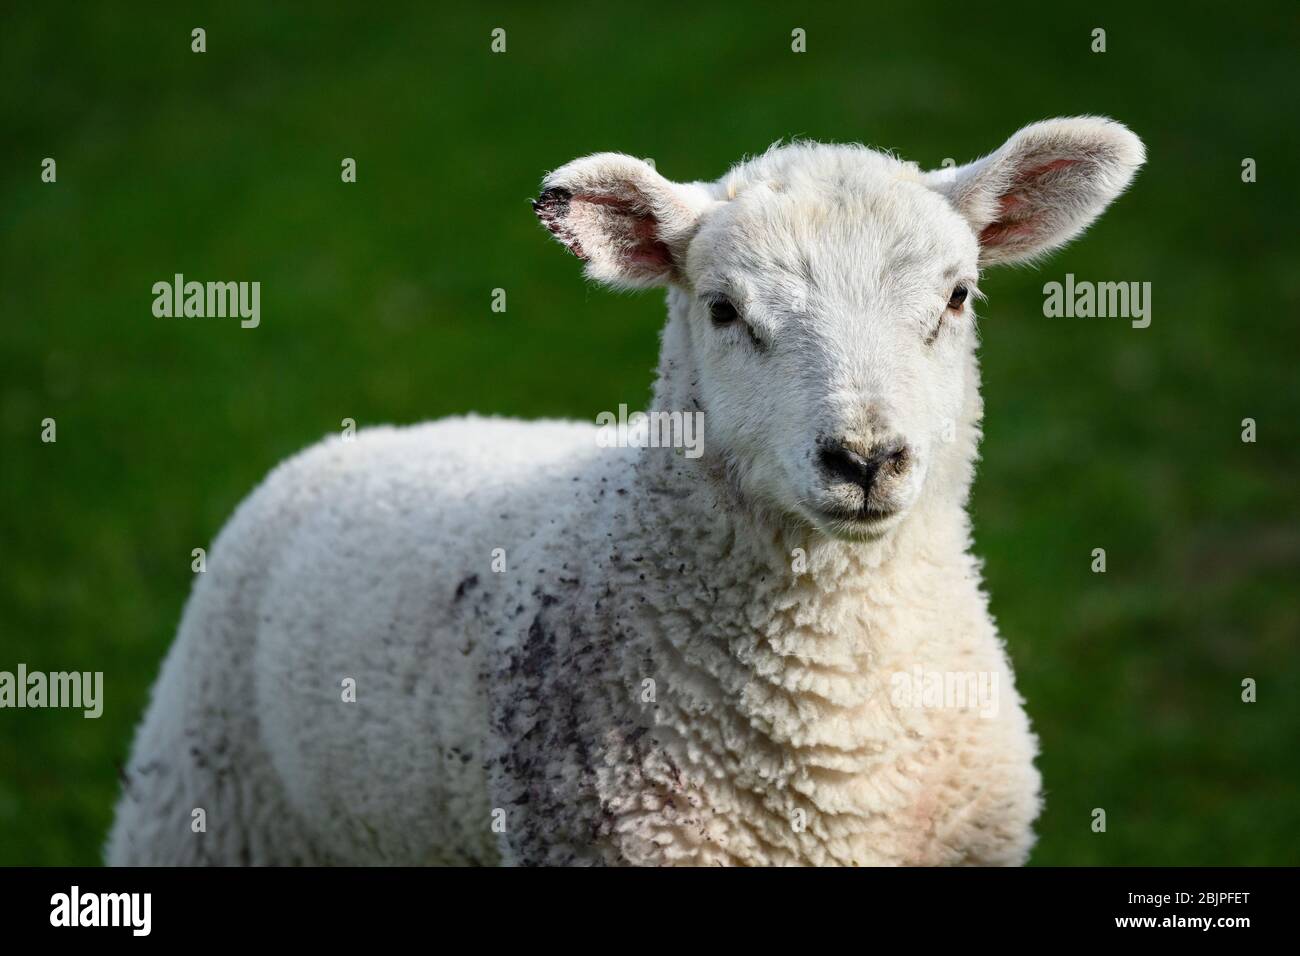 Close up of 1 tiny cute white lamb (head & shoulders) with injury & blood on ear, standing alone in farm field in spring - Yorkshire, England, UK. Stock Photo